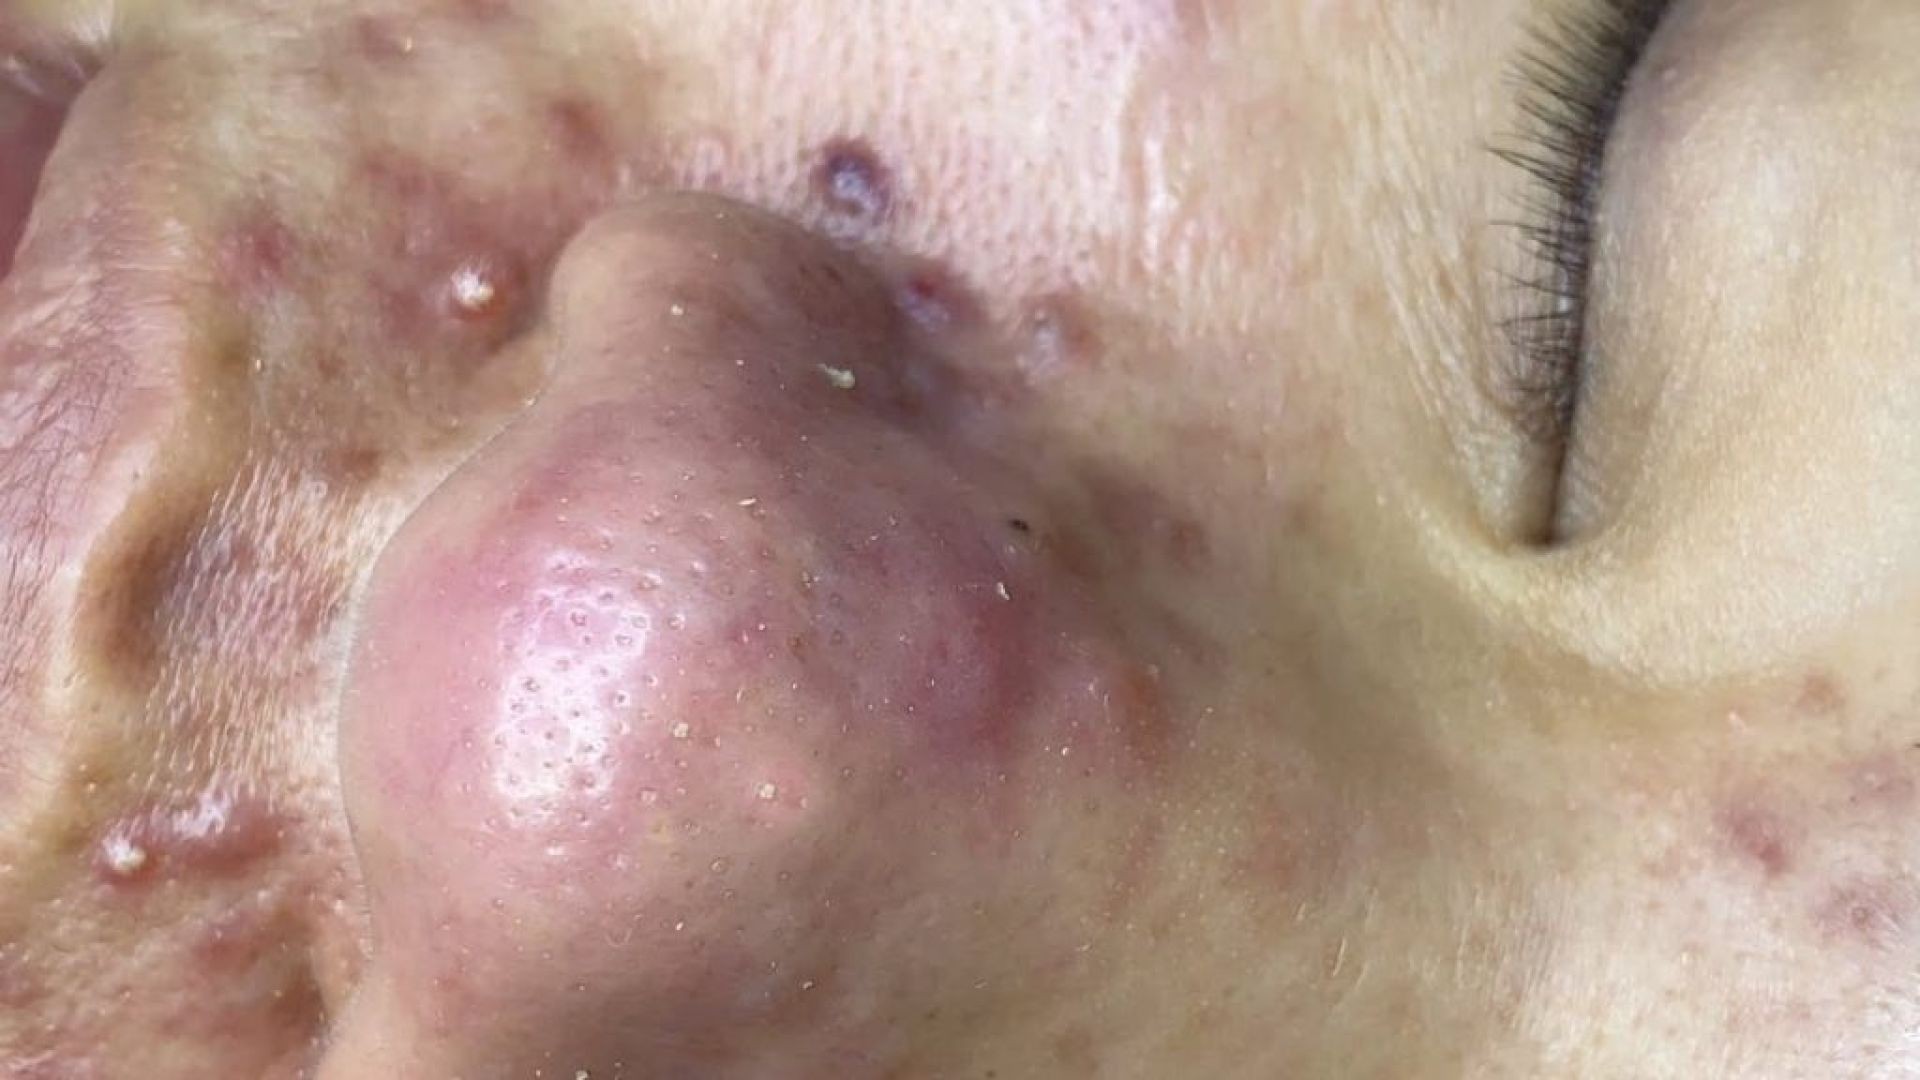 Amazing Blackheads Seen in this Video. Just Wait for It!